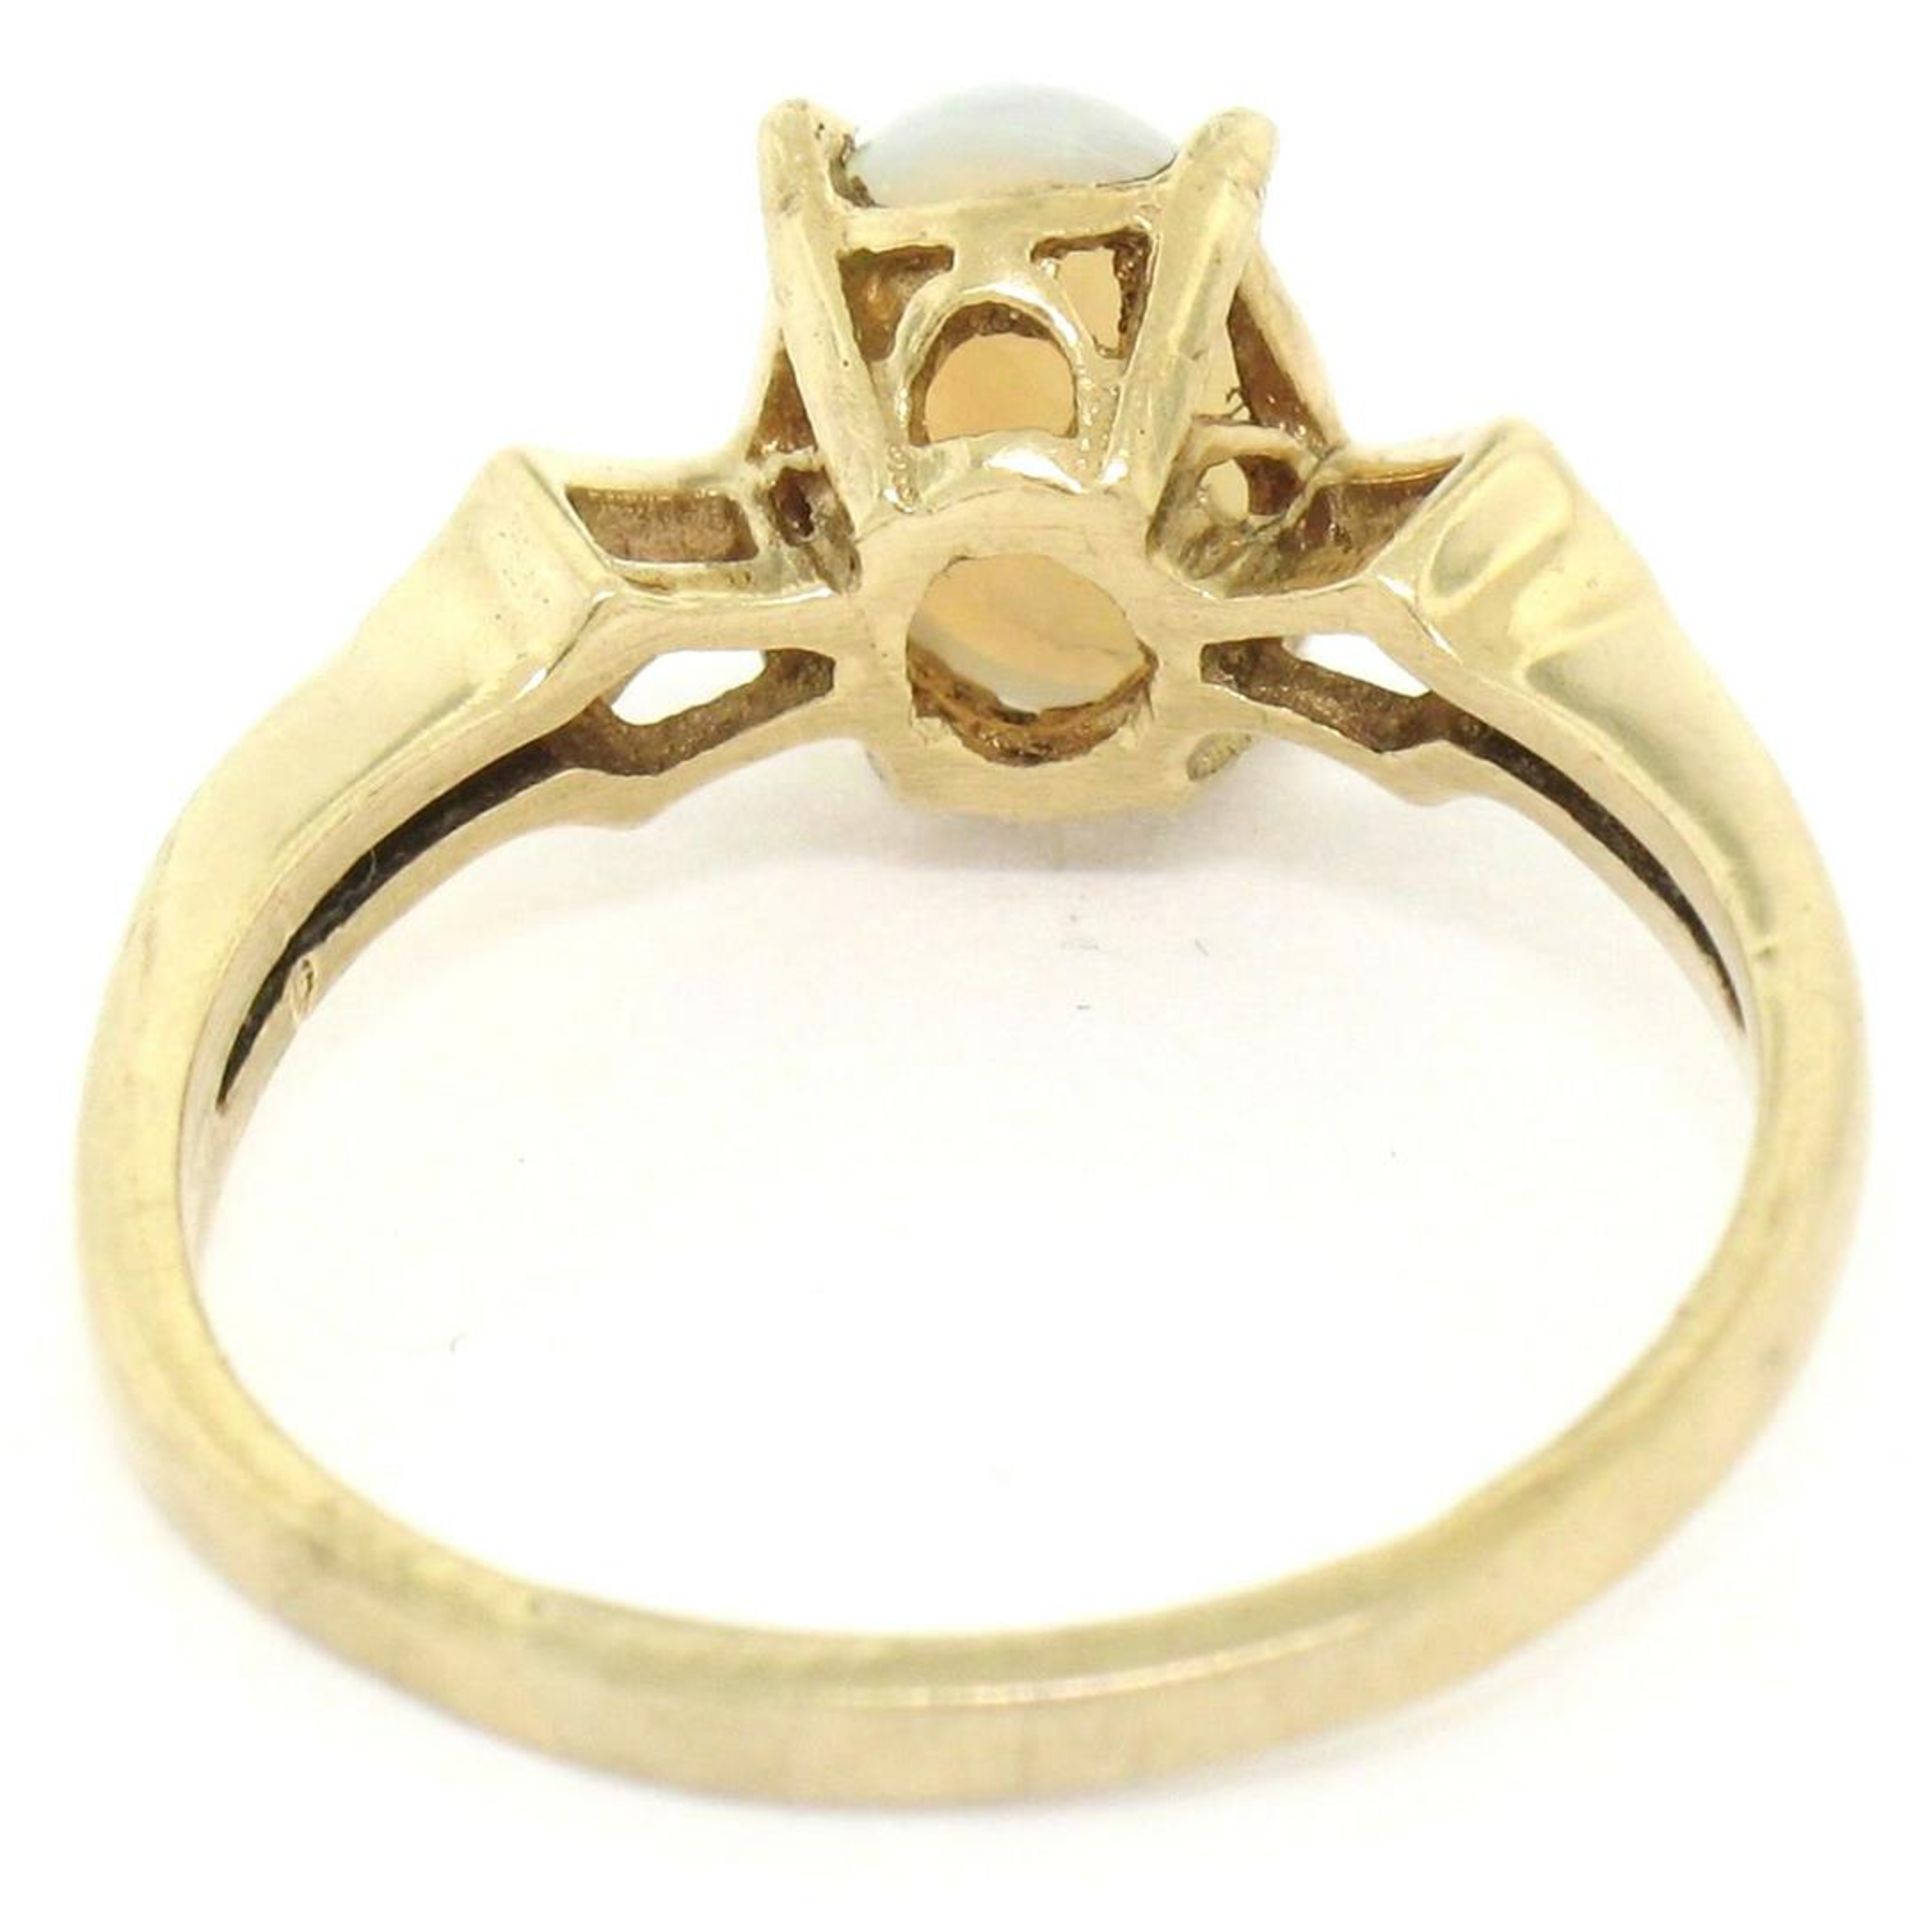 Vintage 14K Yellow Gold 0.65ct Petite Oval Cabochon Opal Solitaire Ring Size 6 - Image 5 of 9